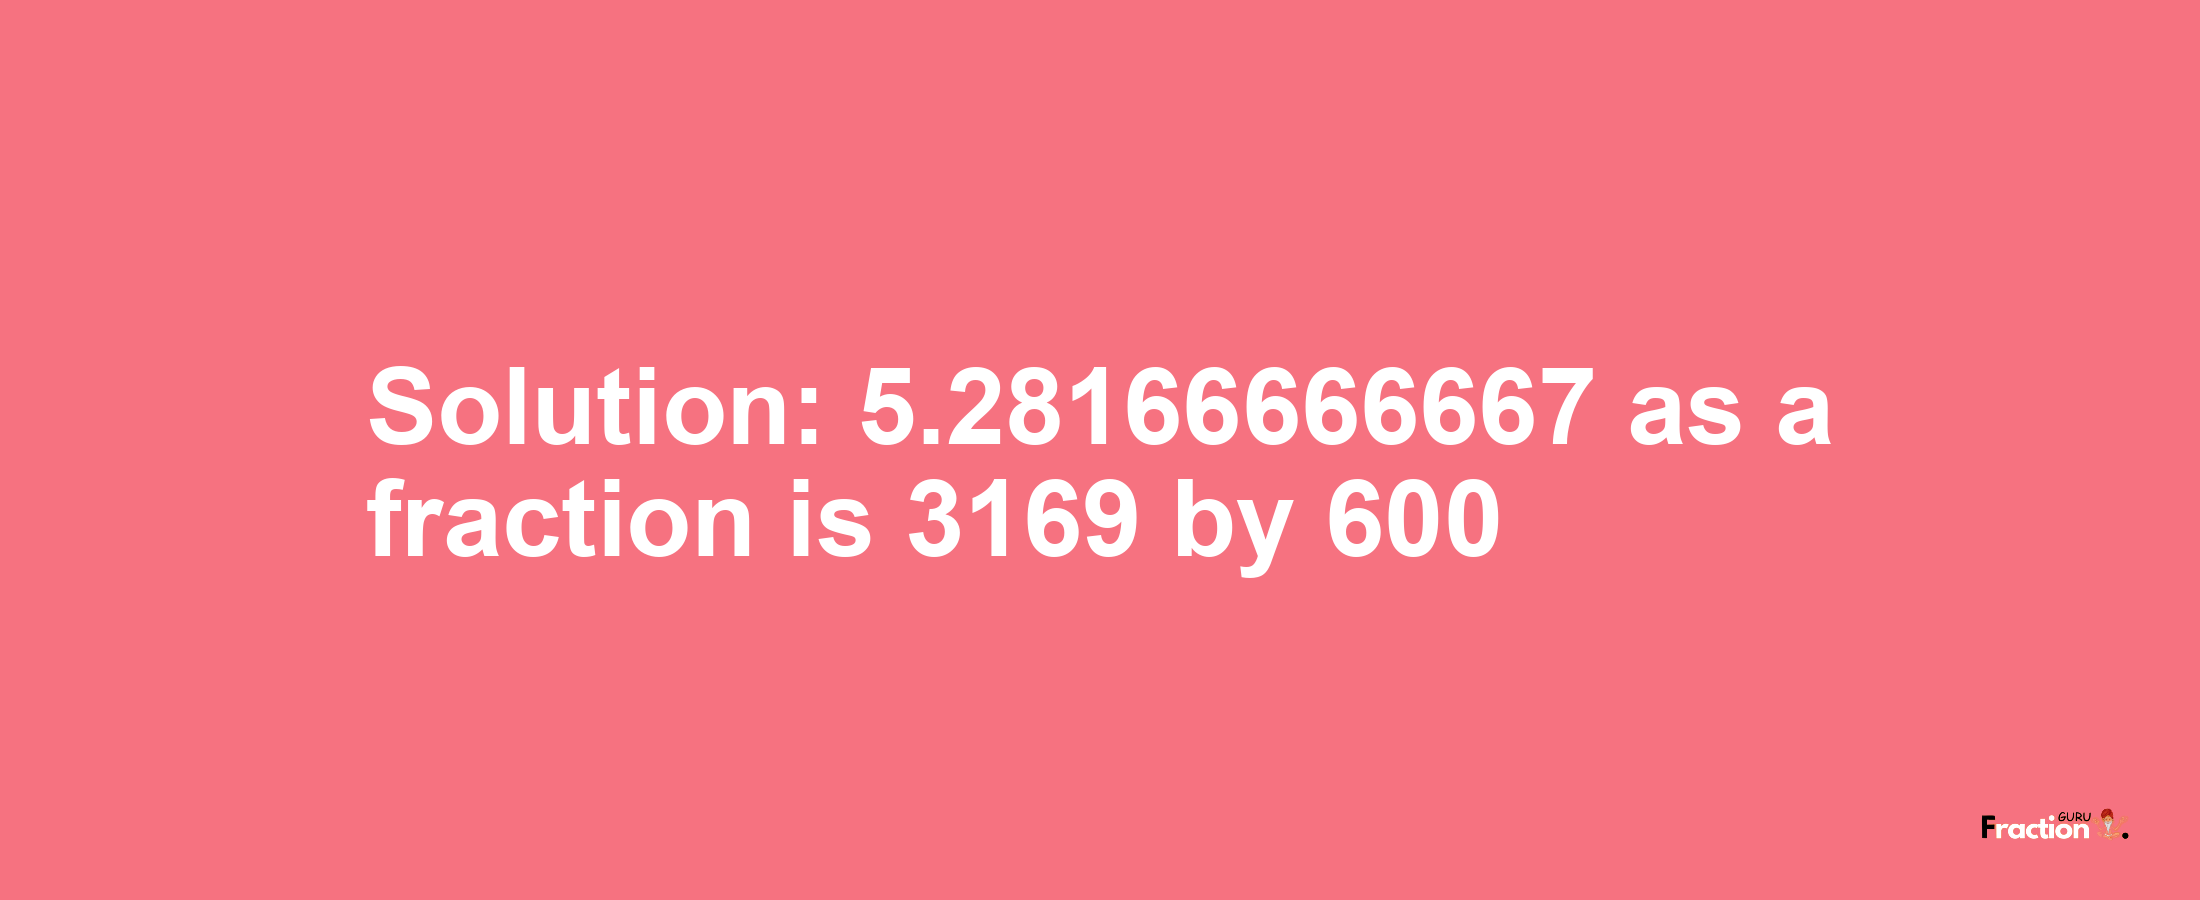 Solution:5.28166666667 as a fraction is 3169/600